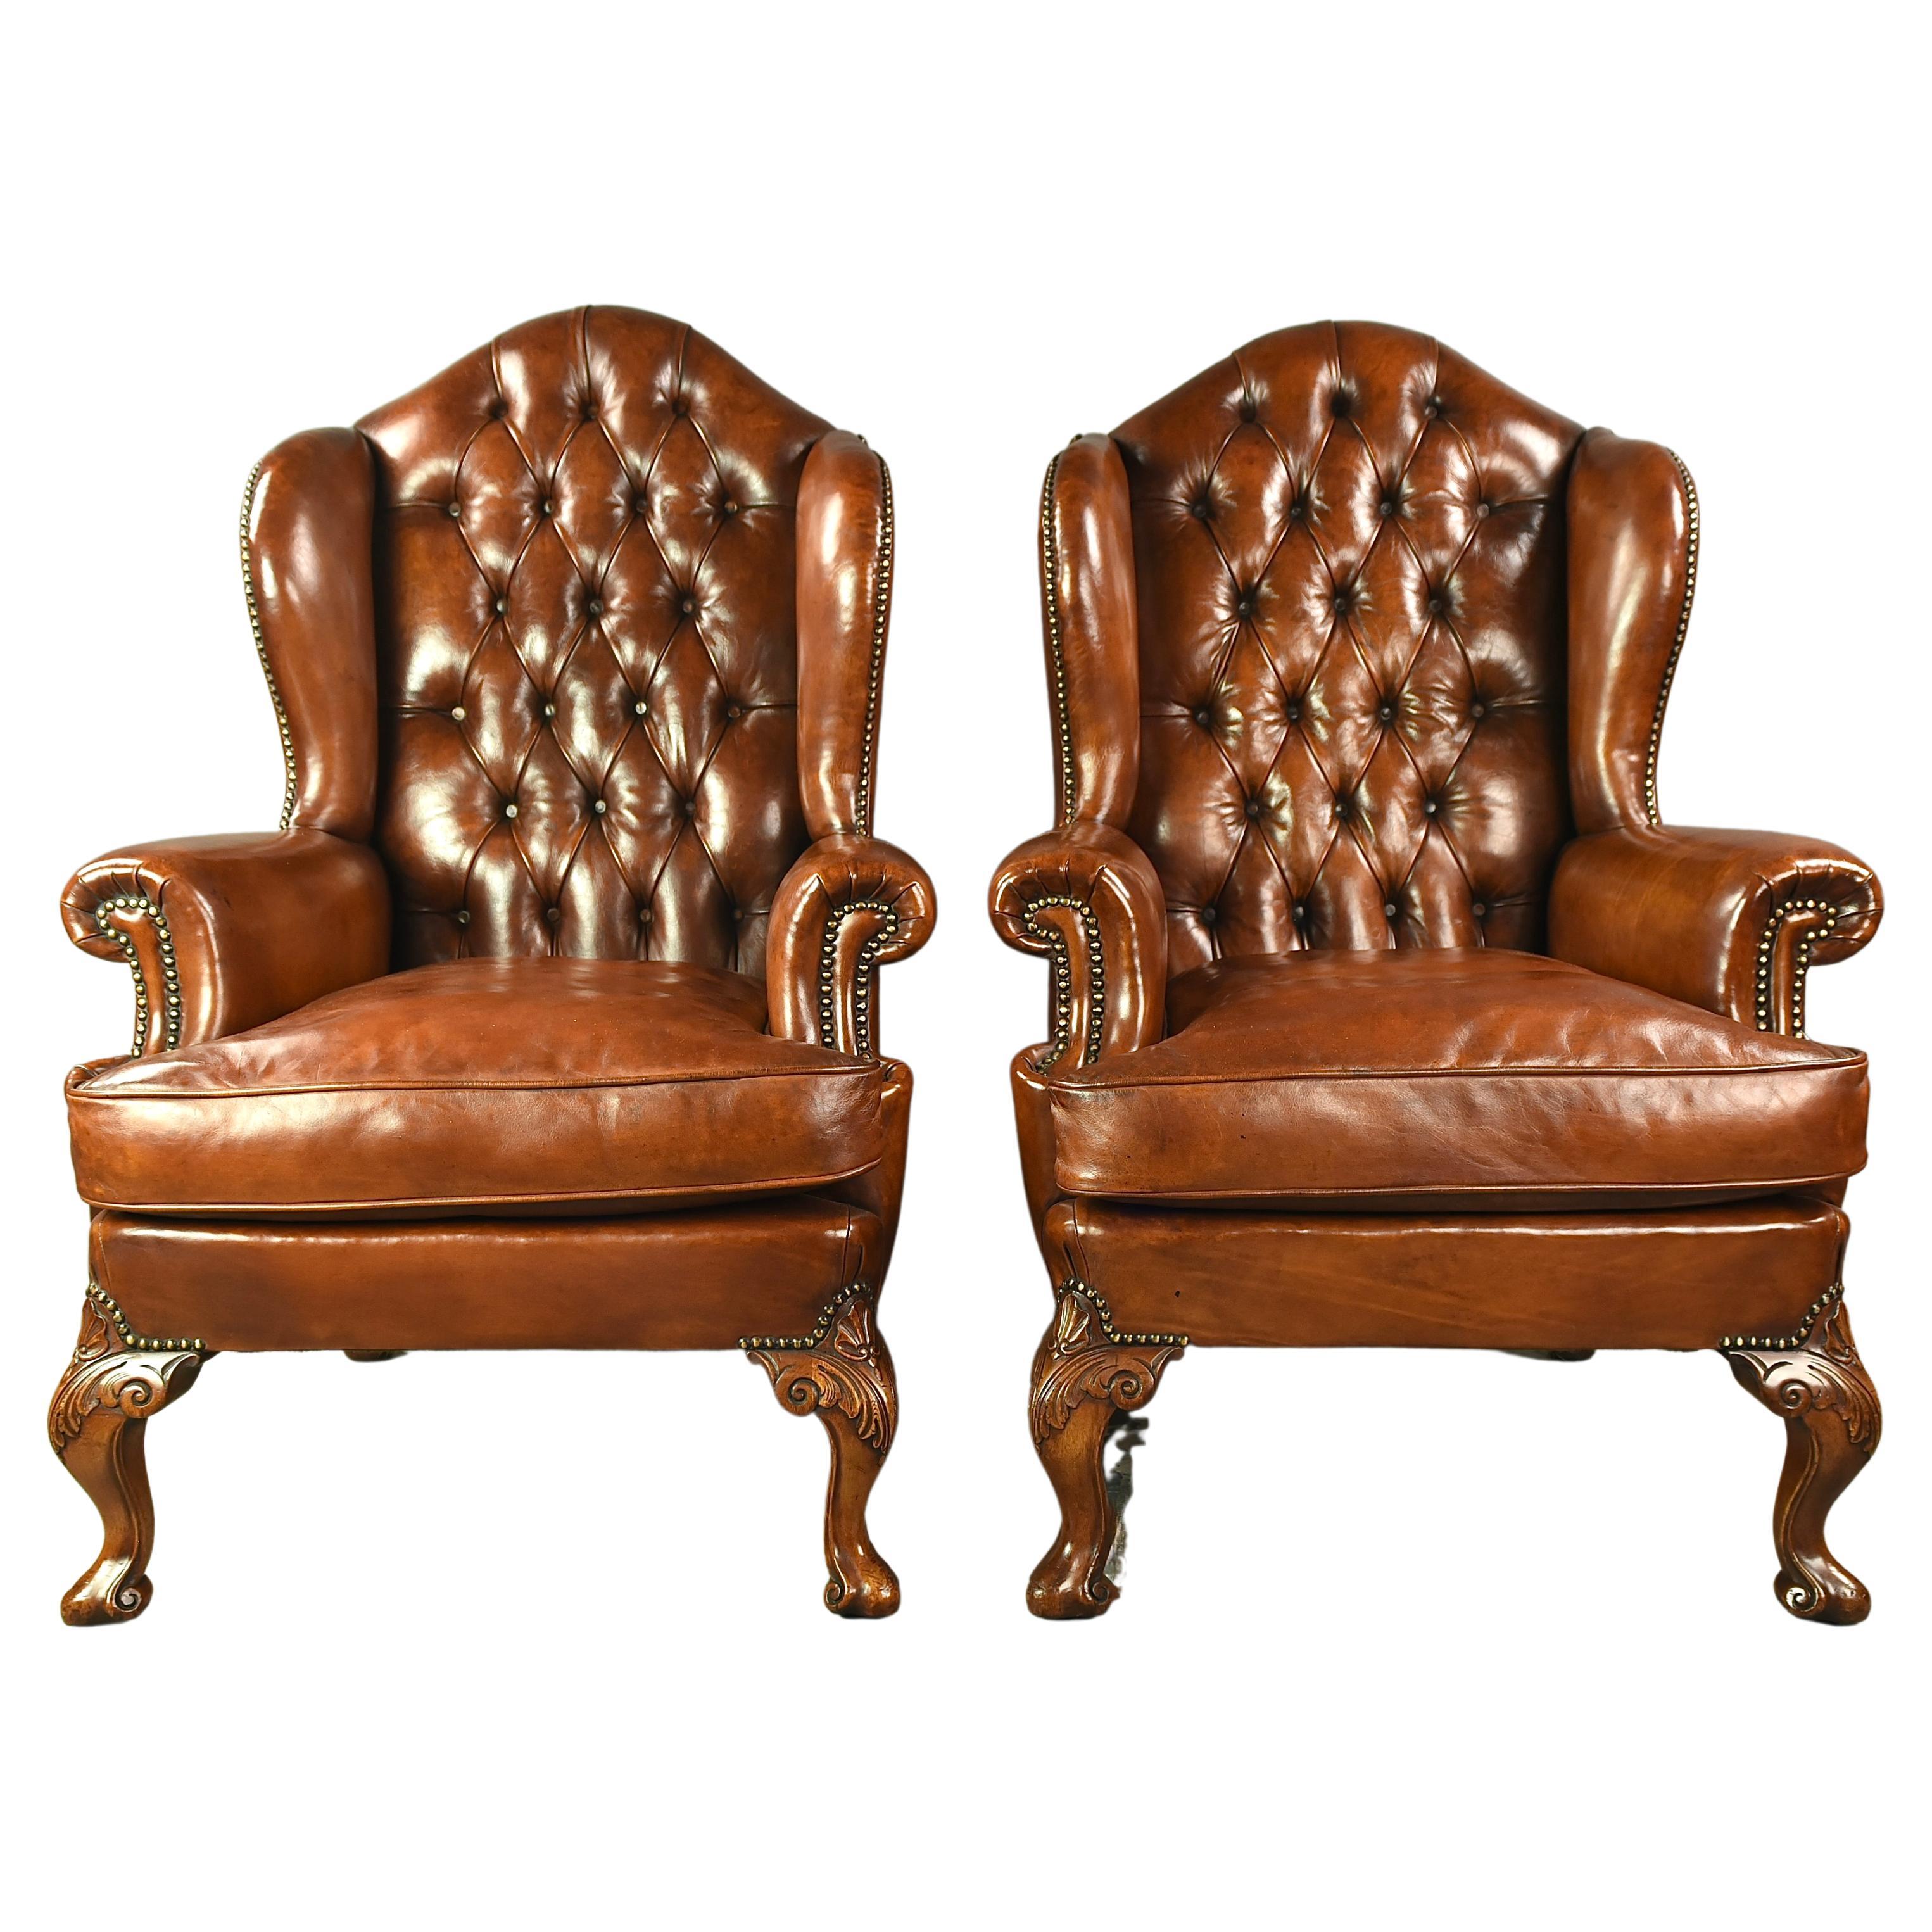 Antique pair of Georgian leather wing chairs 